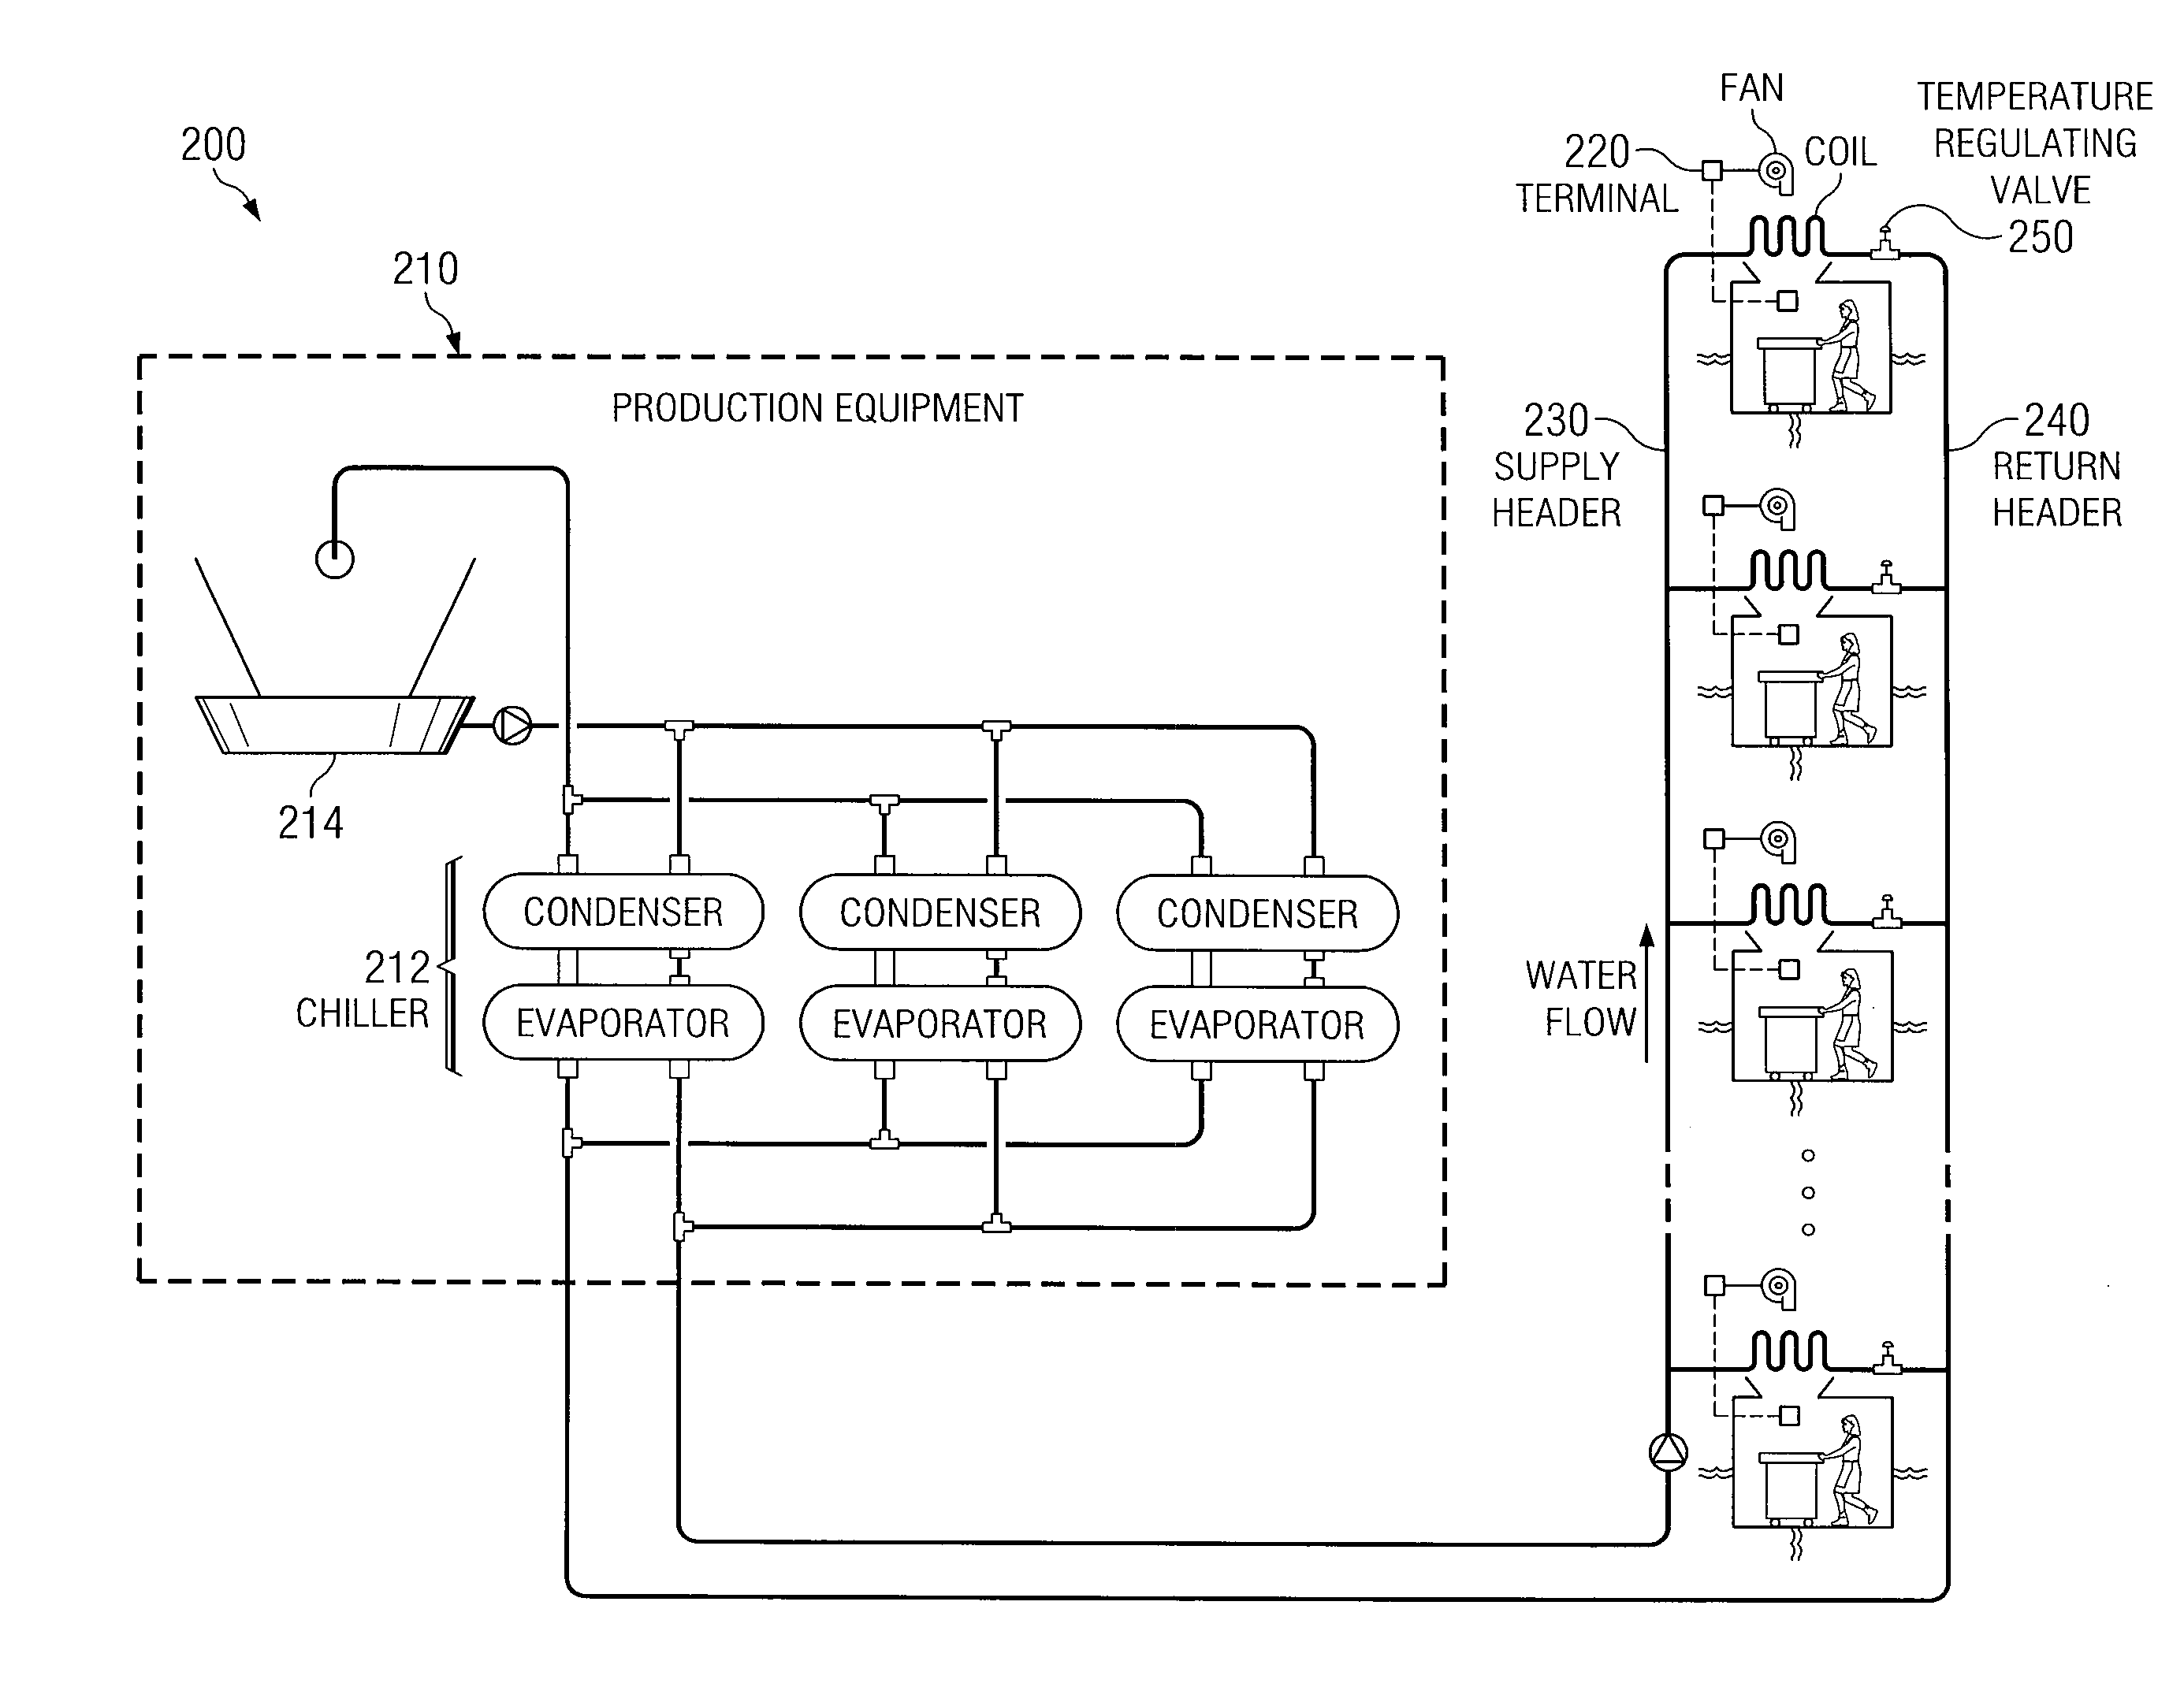 Electronically Based Control Valve with Feedback to a Building Management System (BMS)